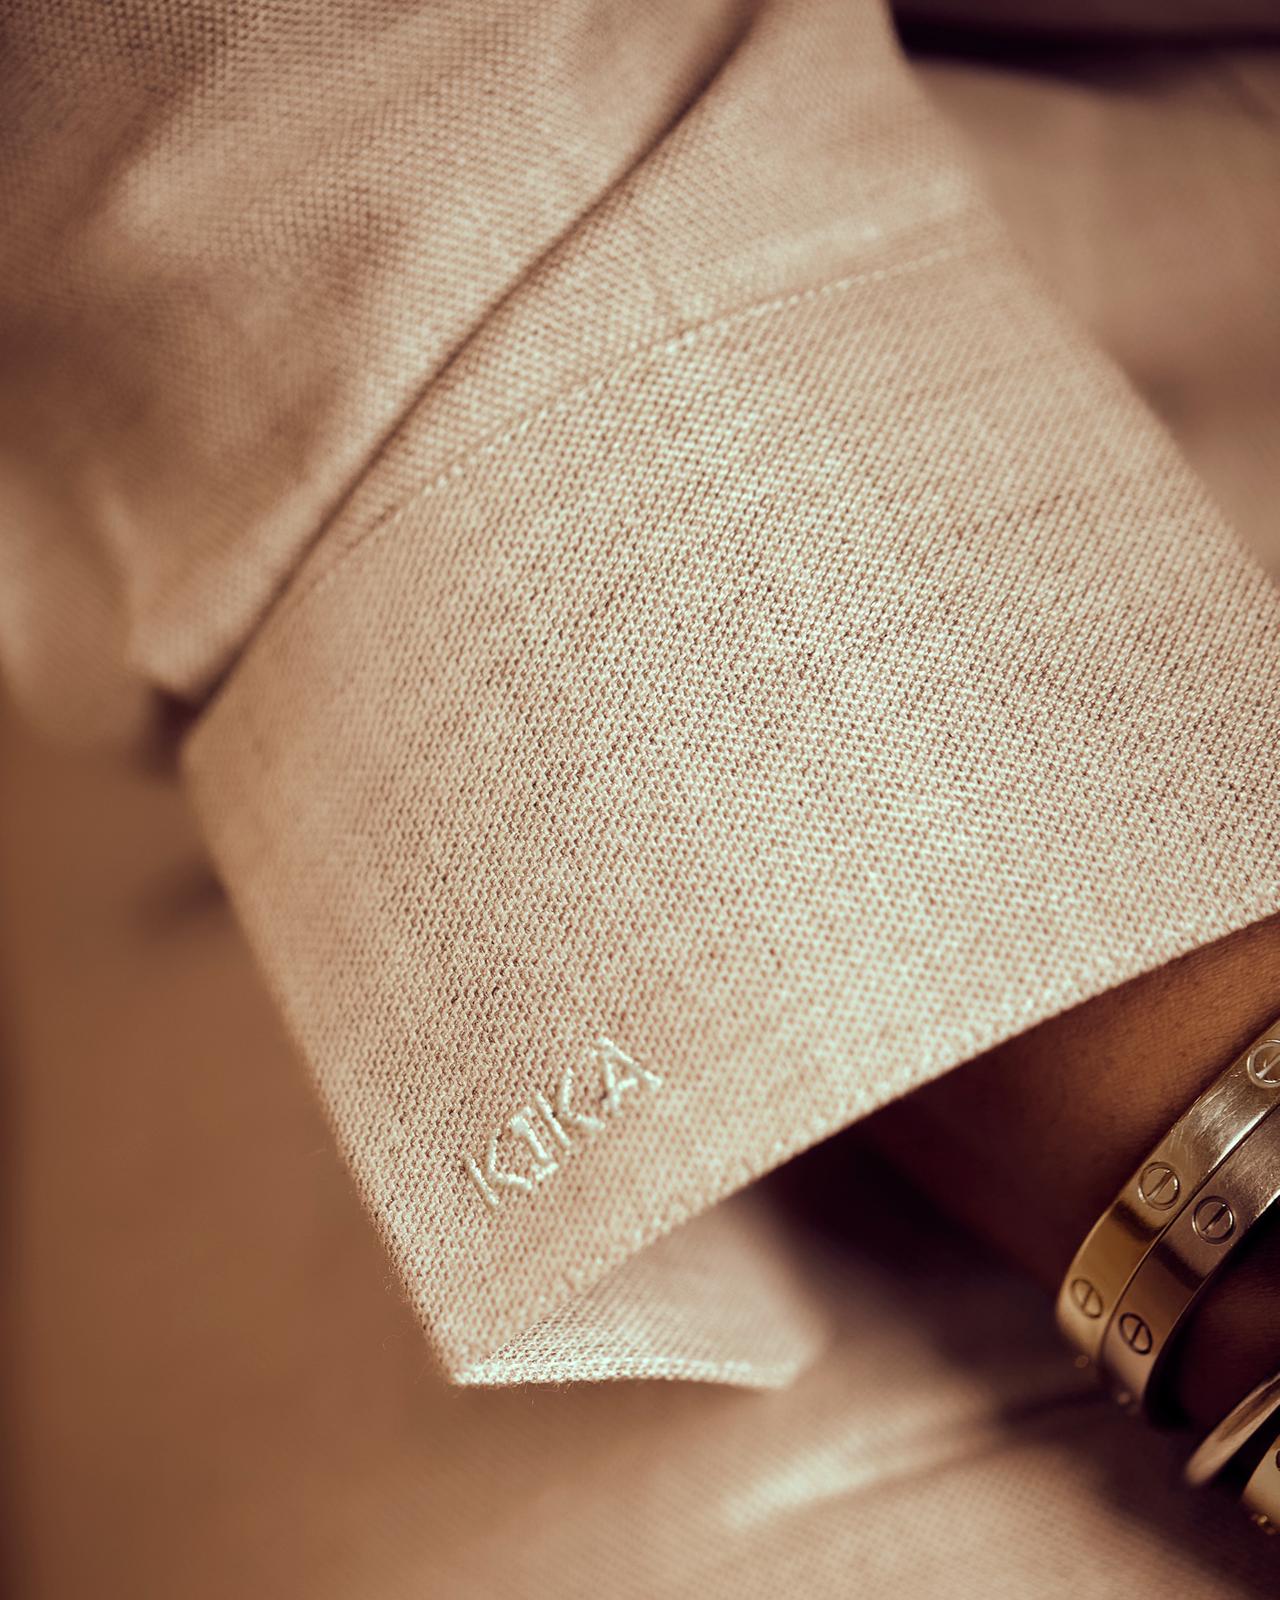 Initials (on the cuff)